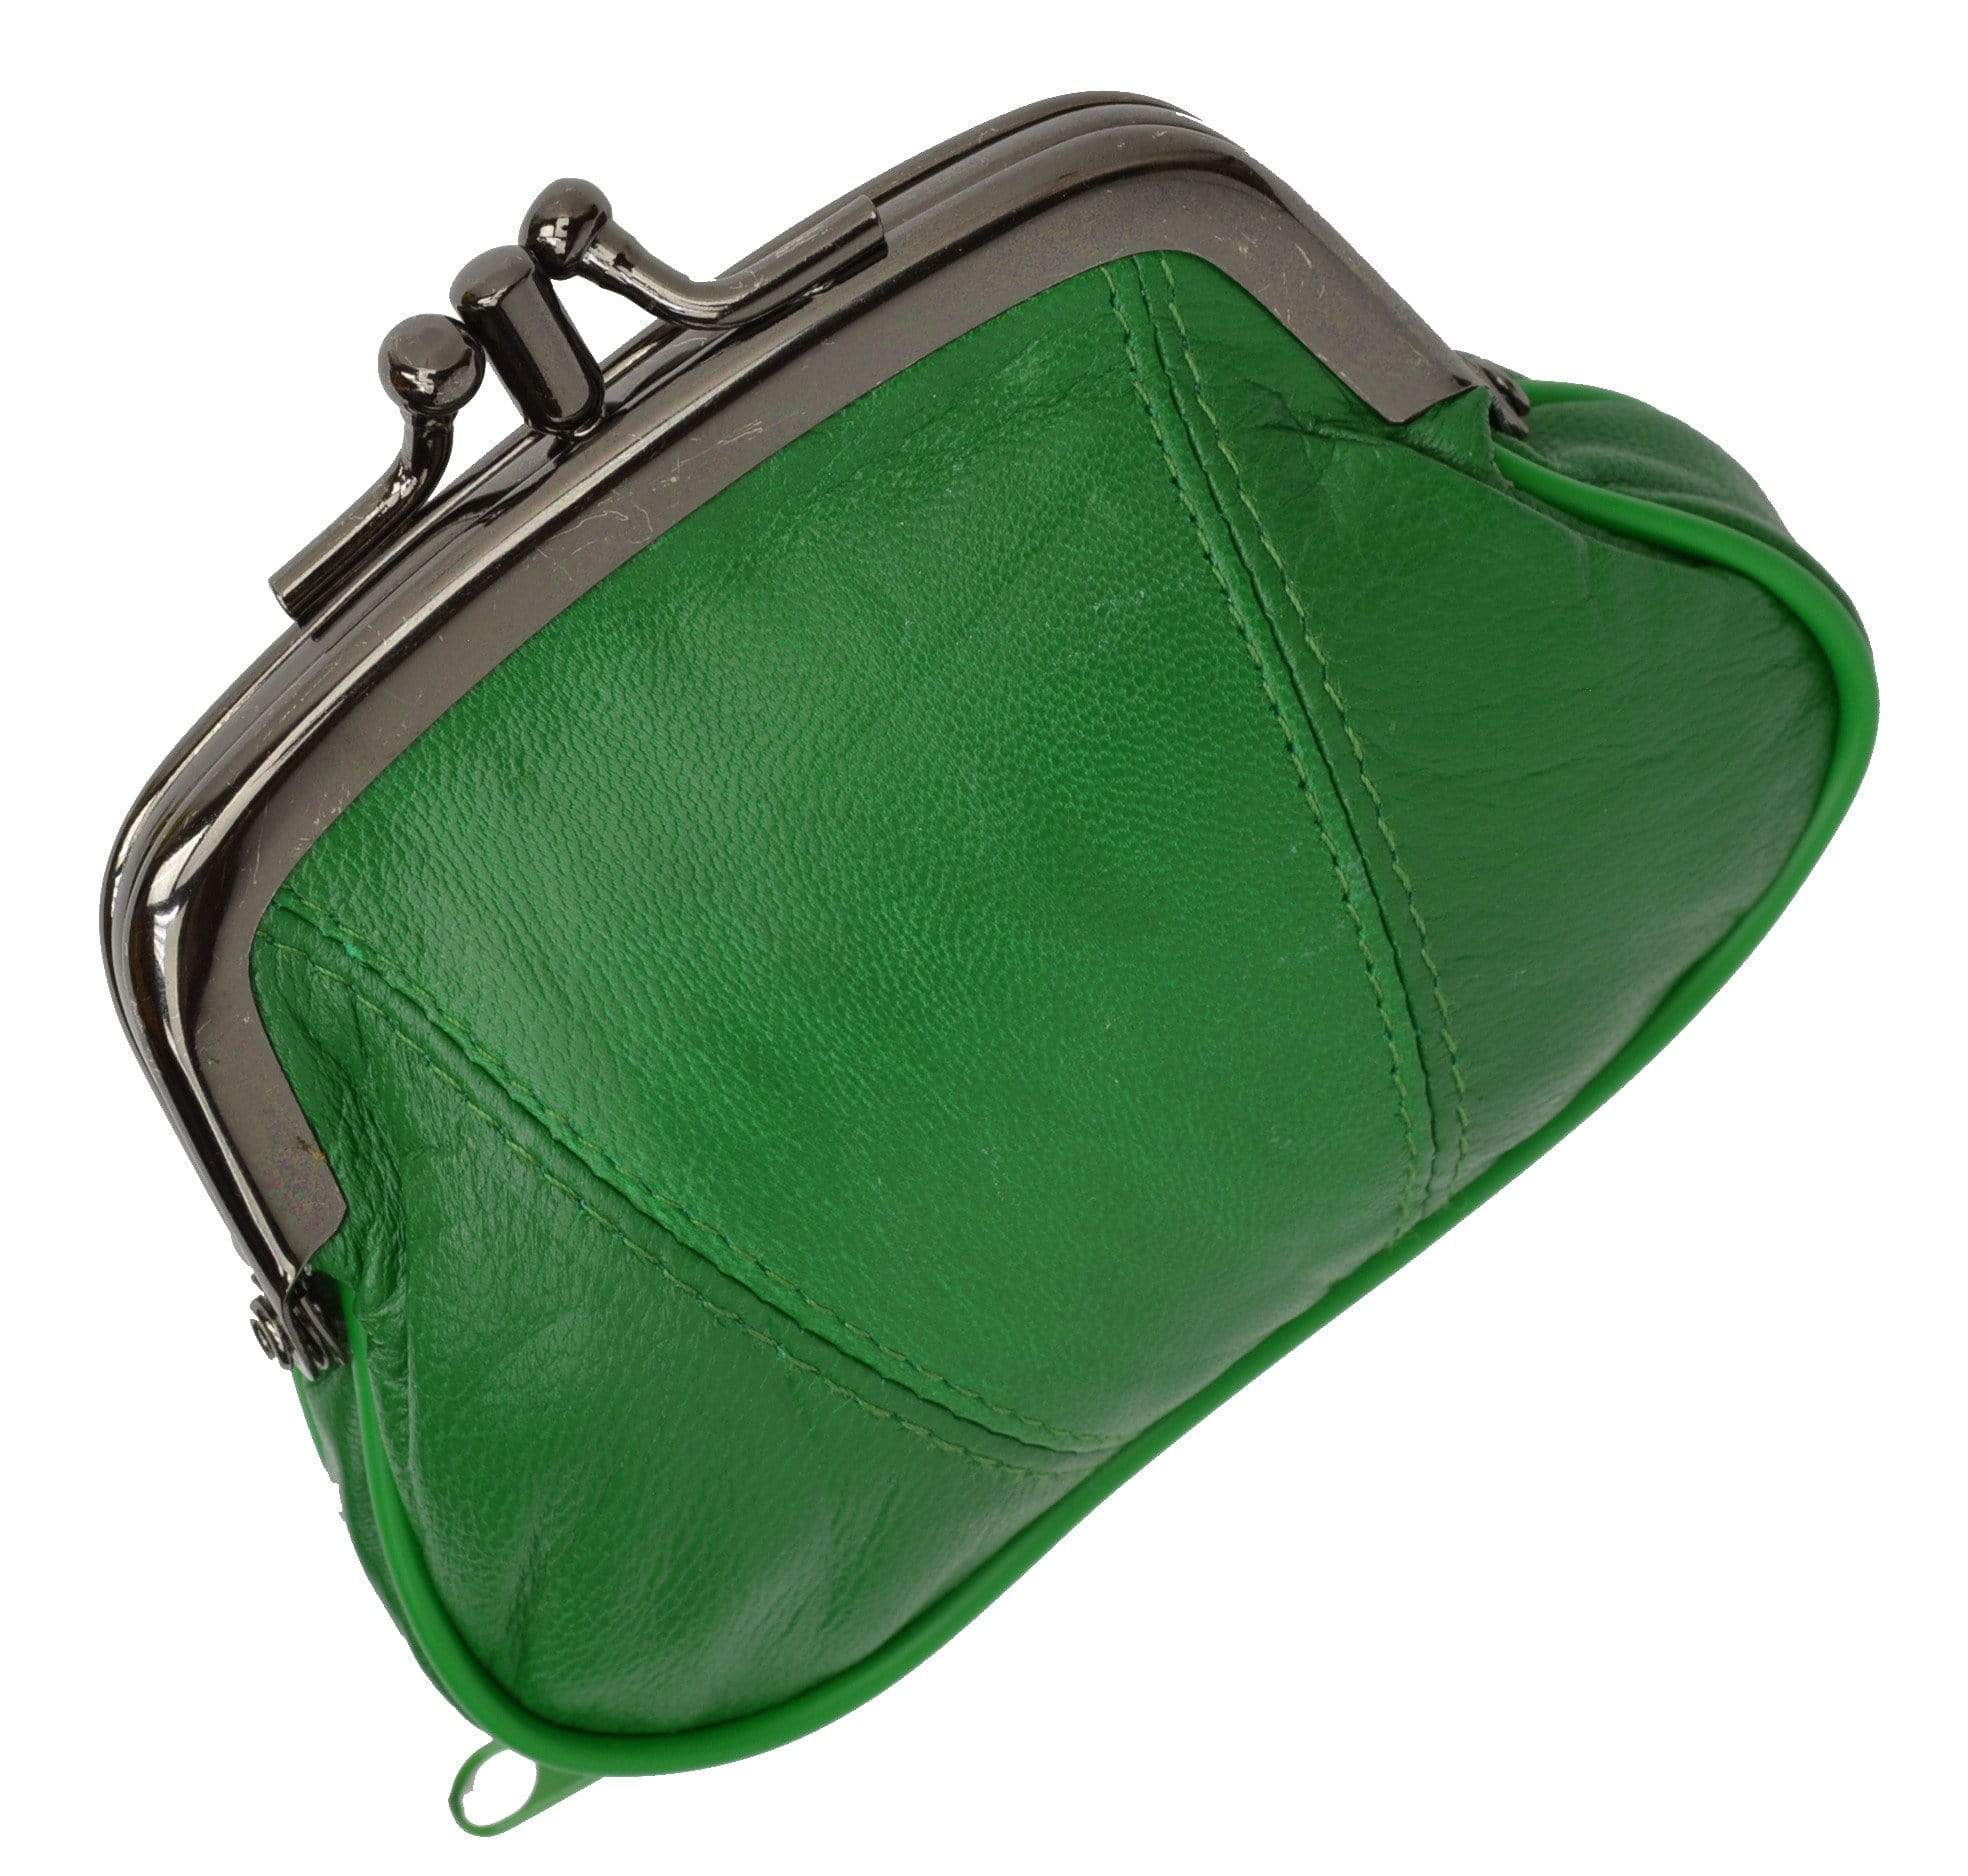 Leather Small Change Purse Double Frame with Zipper Pocket Y022 (C)